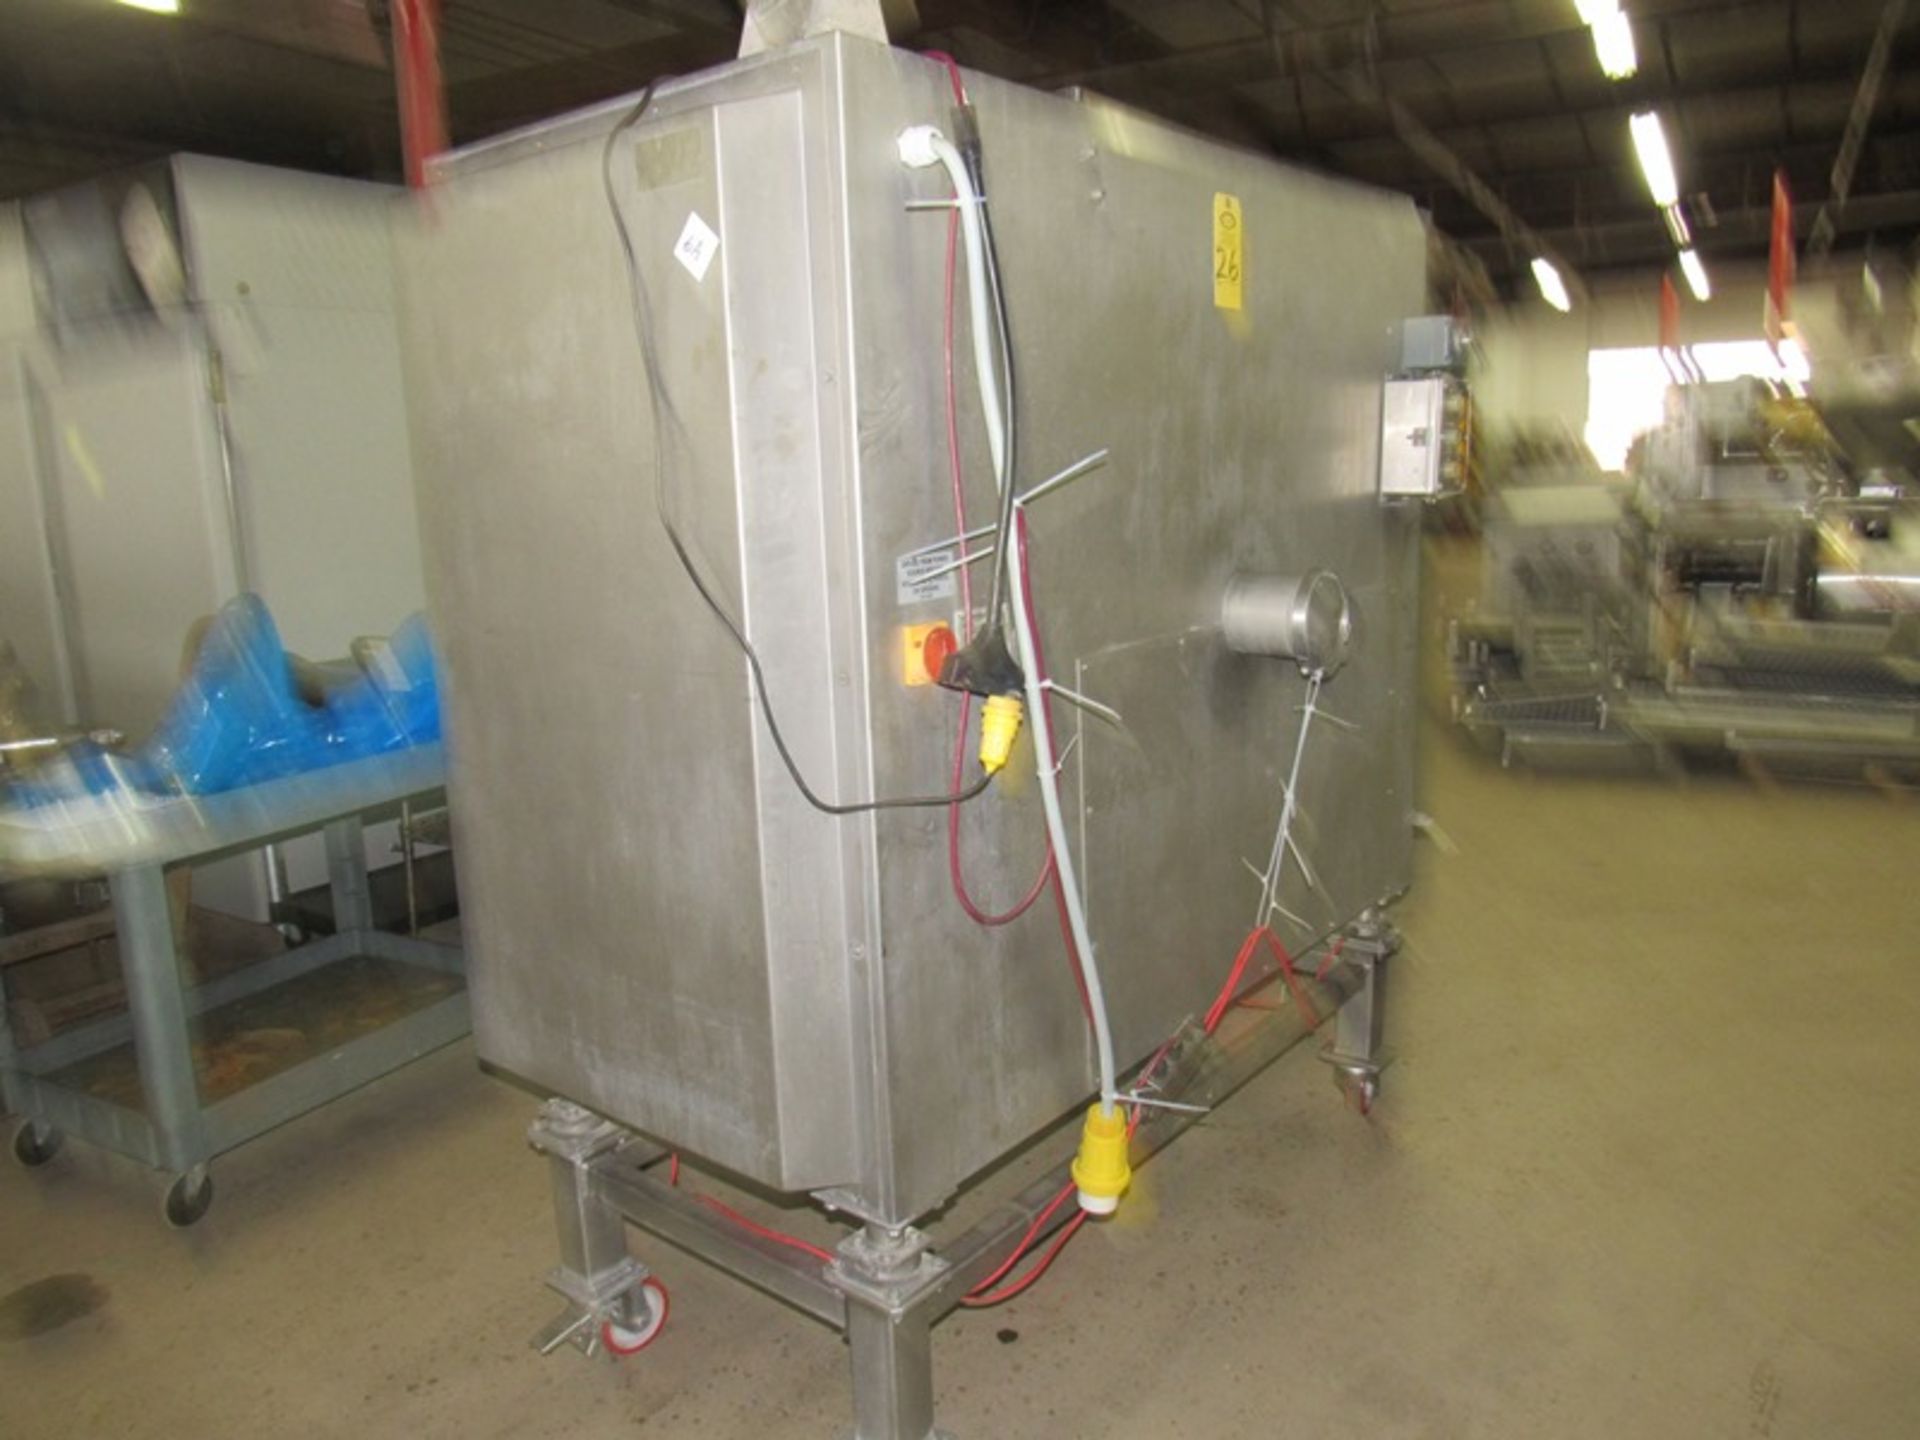 Hollymatic Mdl. 4300 Mixer/Grinder, load cells, on wheels, Ser. #4300120010, 6" head plates, GSE - Image 3 of 12